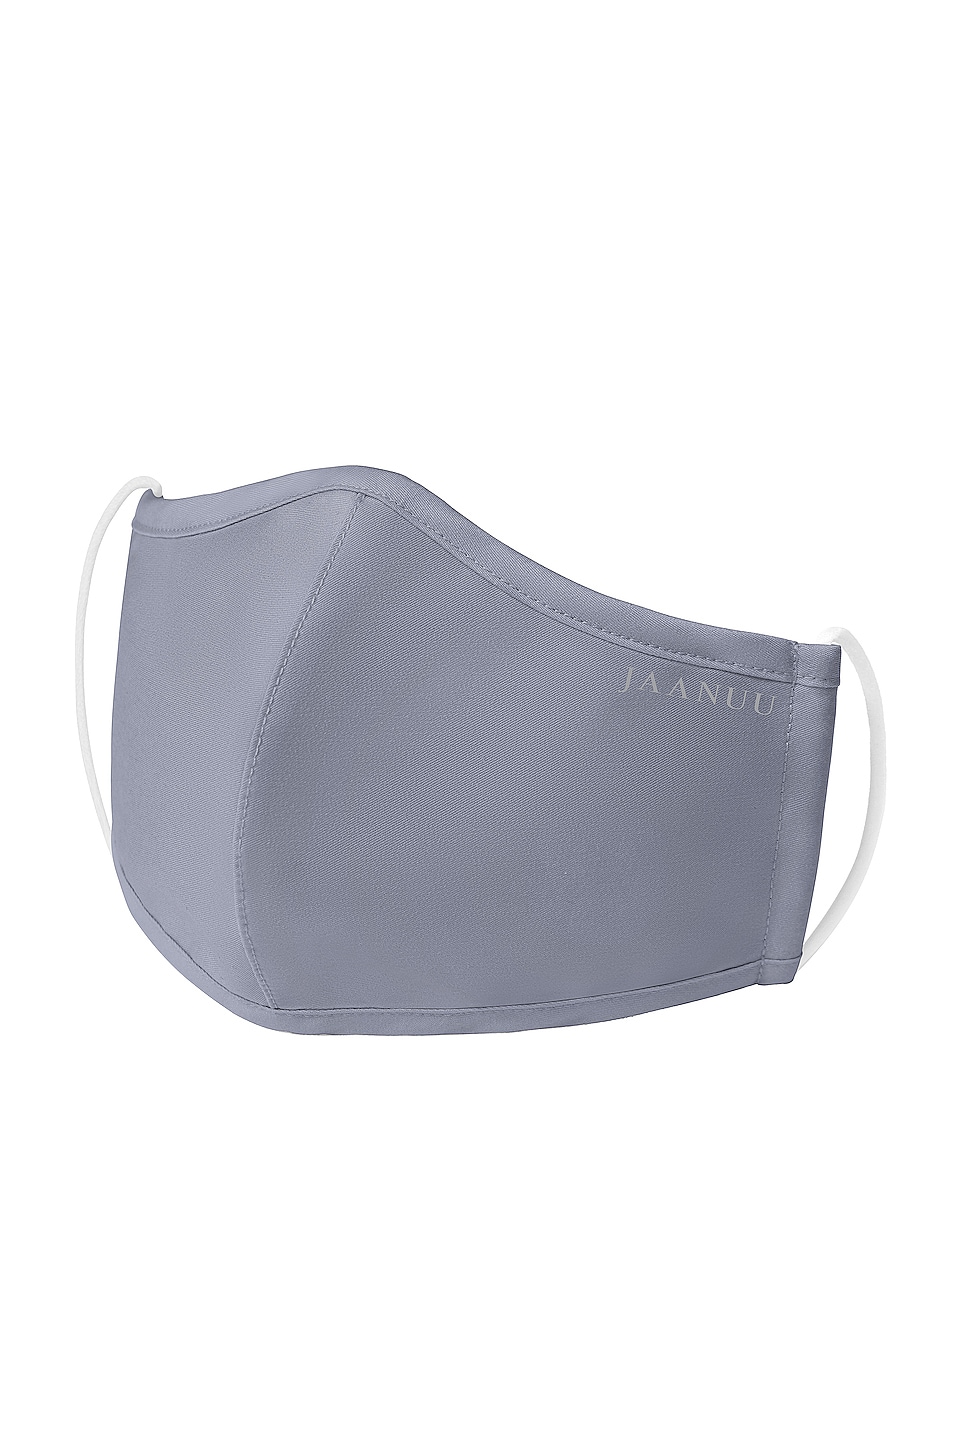 Jaanuu Reusable Antimicrobial Face Mask (5 Pack) Graphite